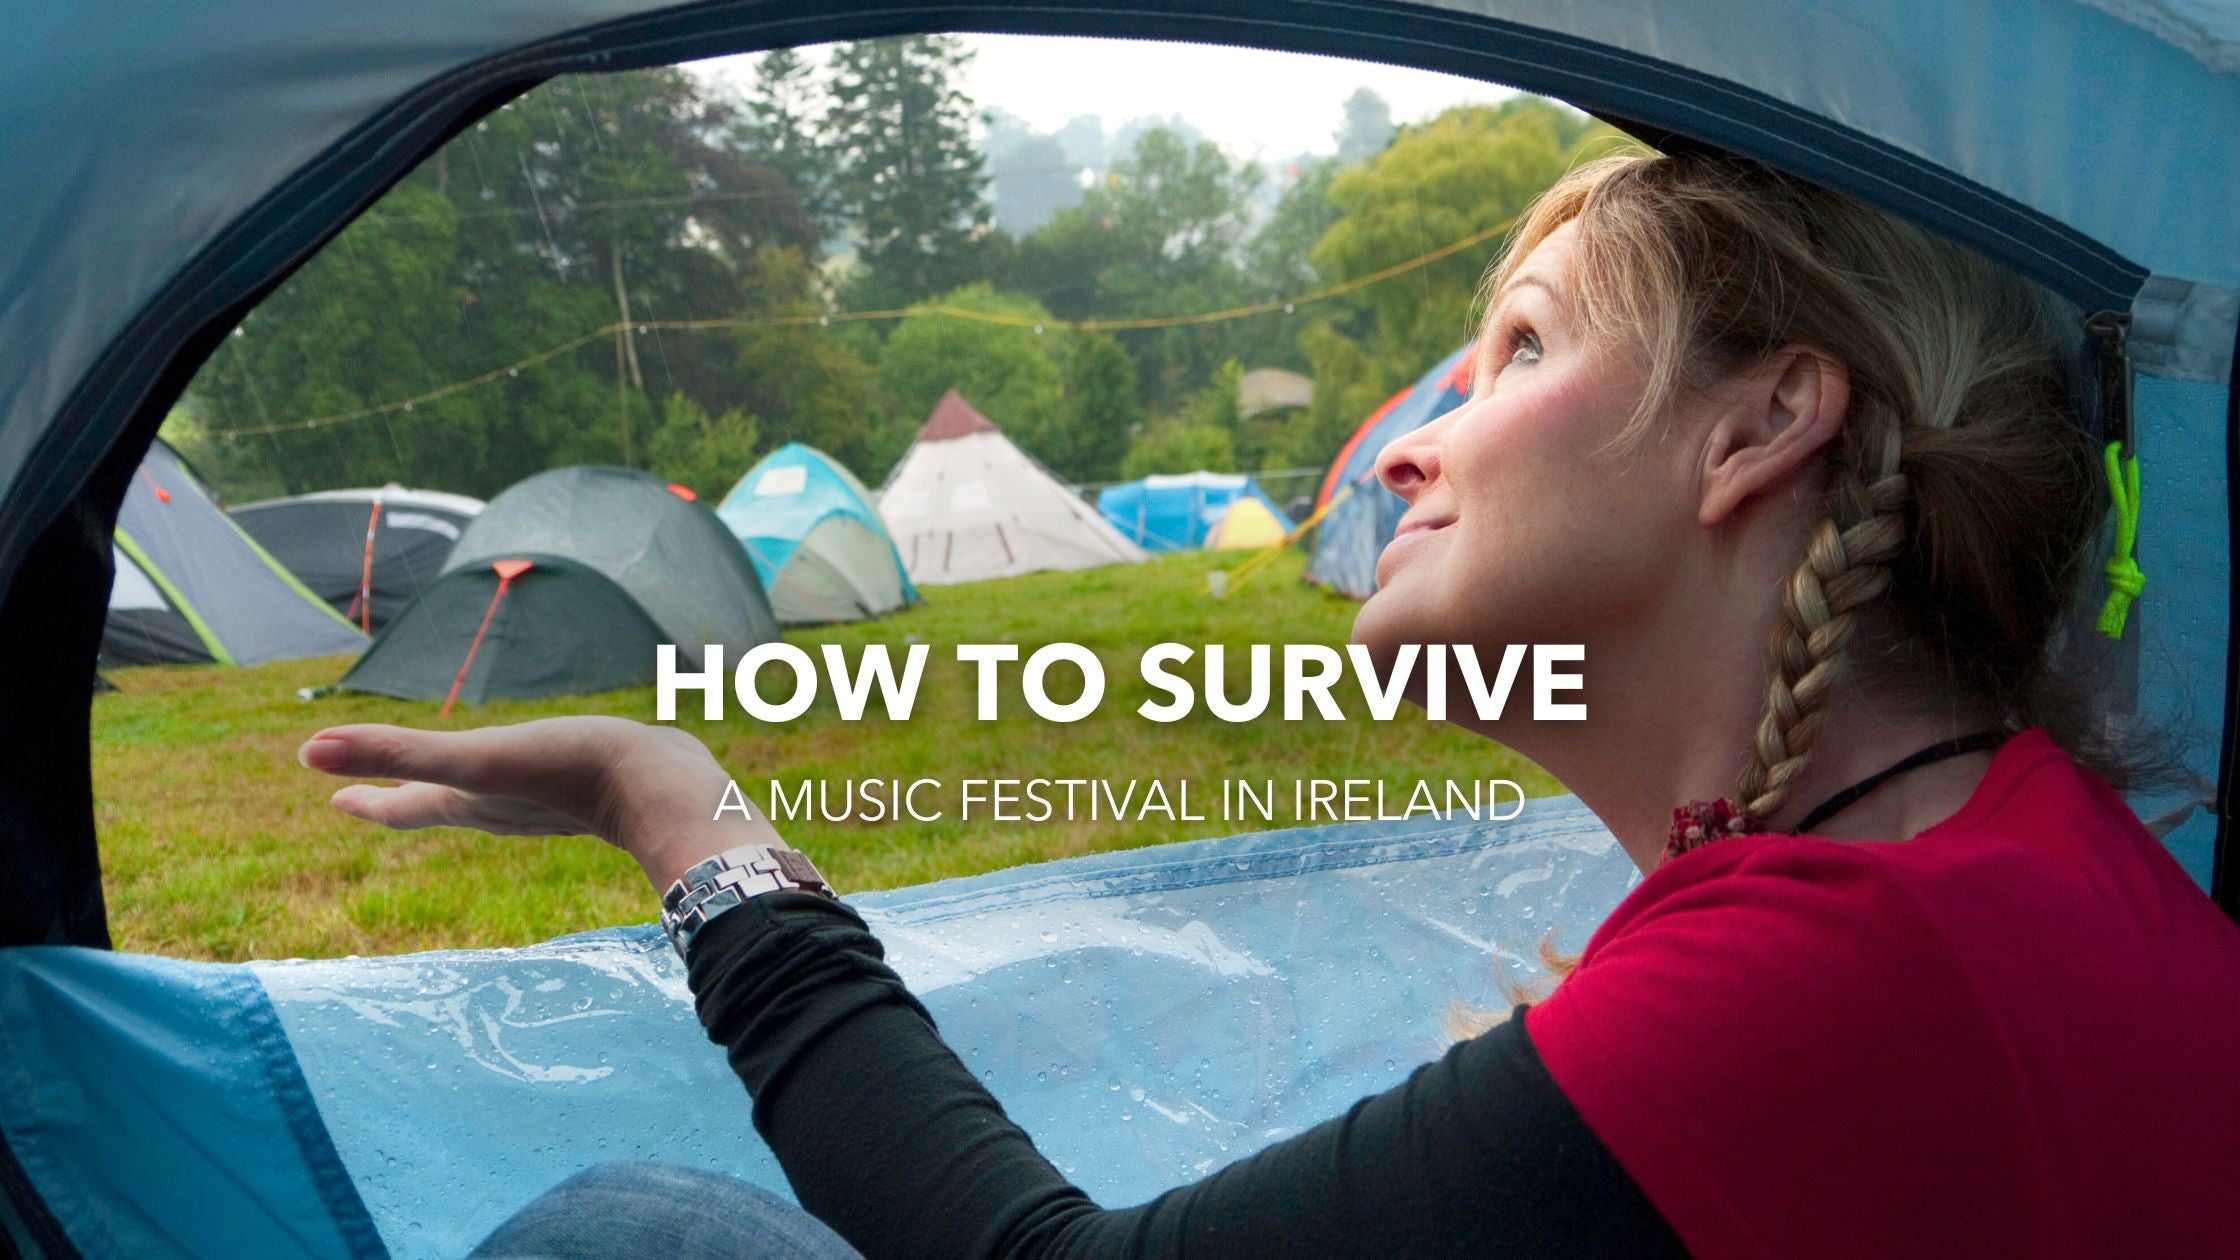 How to Survive a Music Festival in Ireland